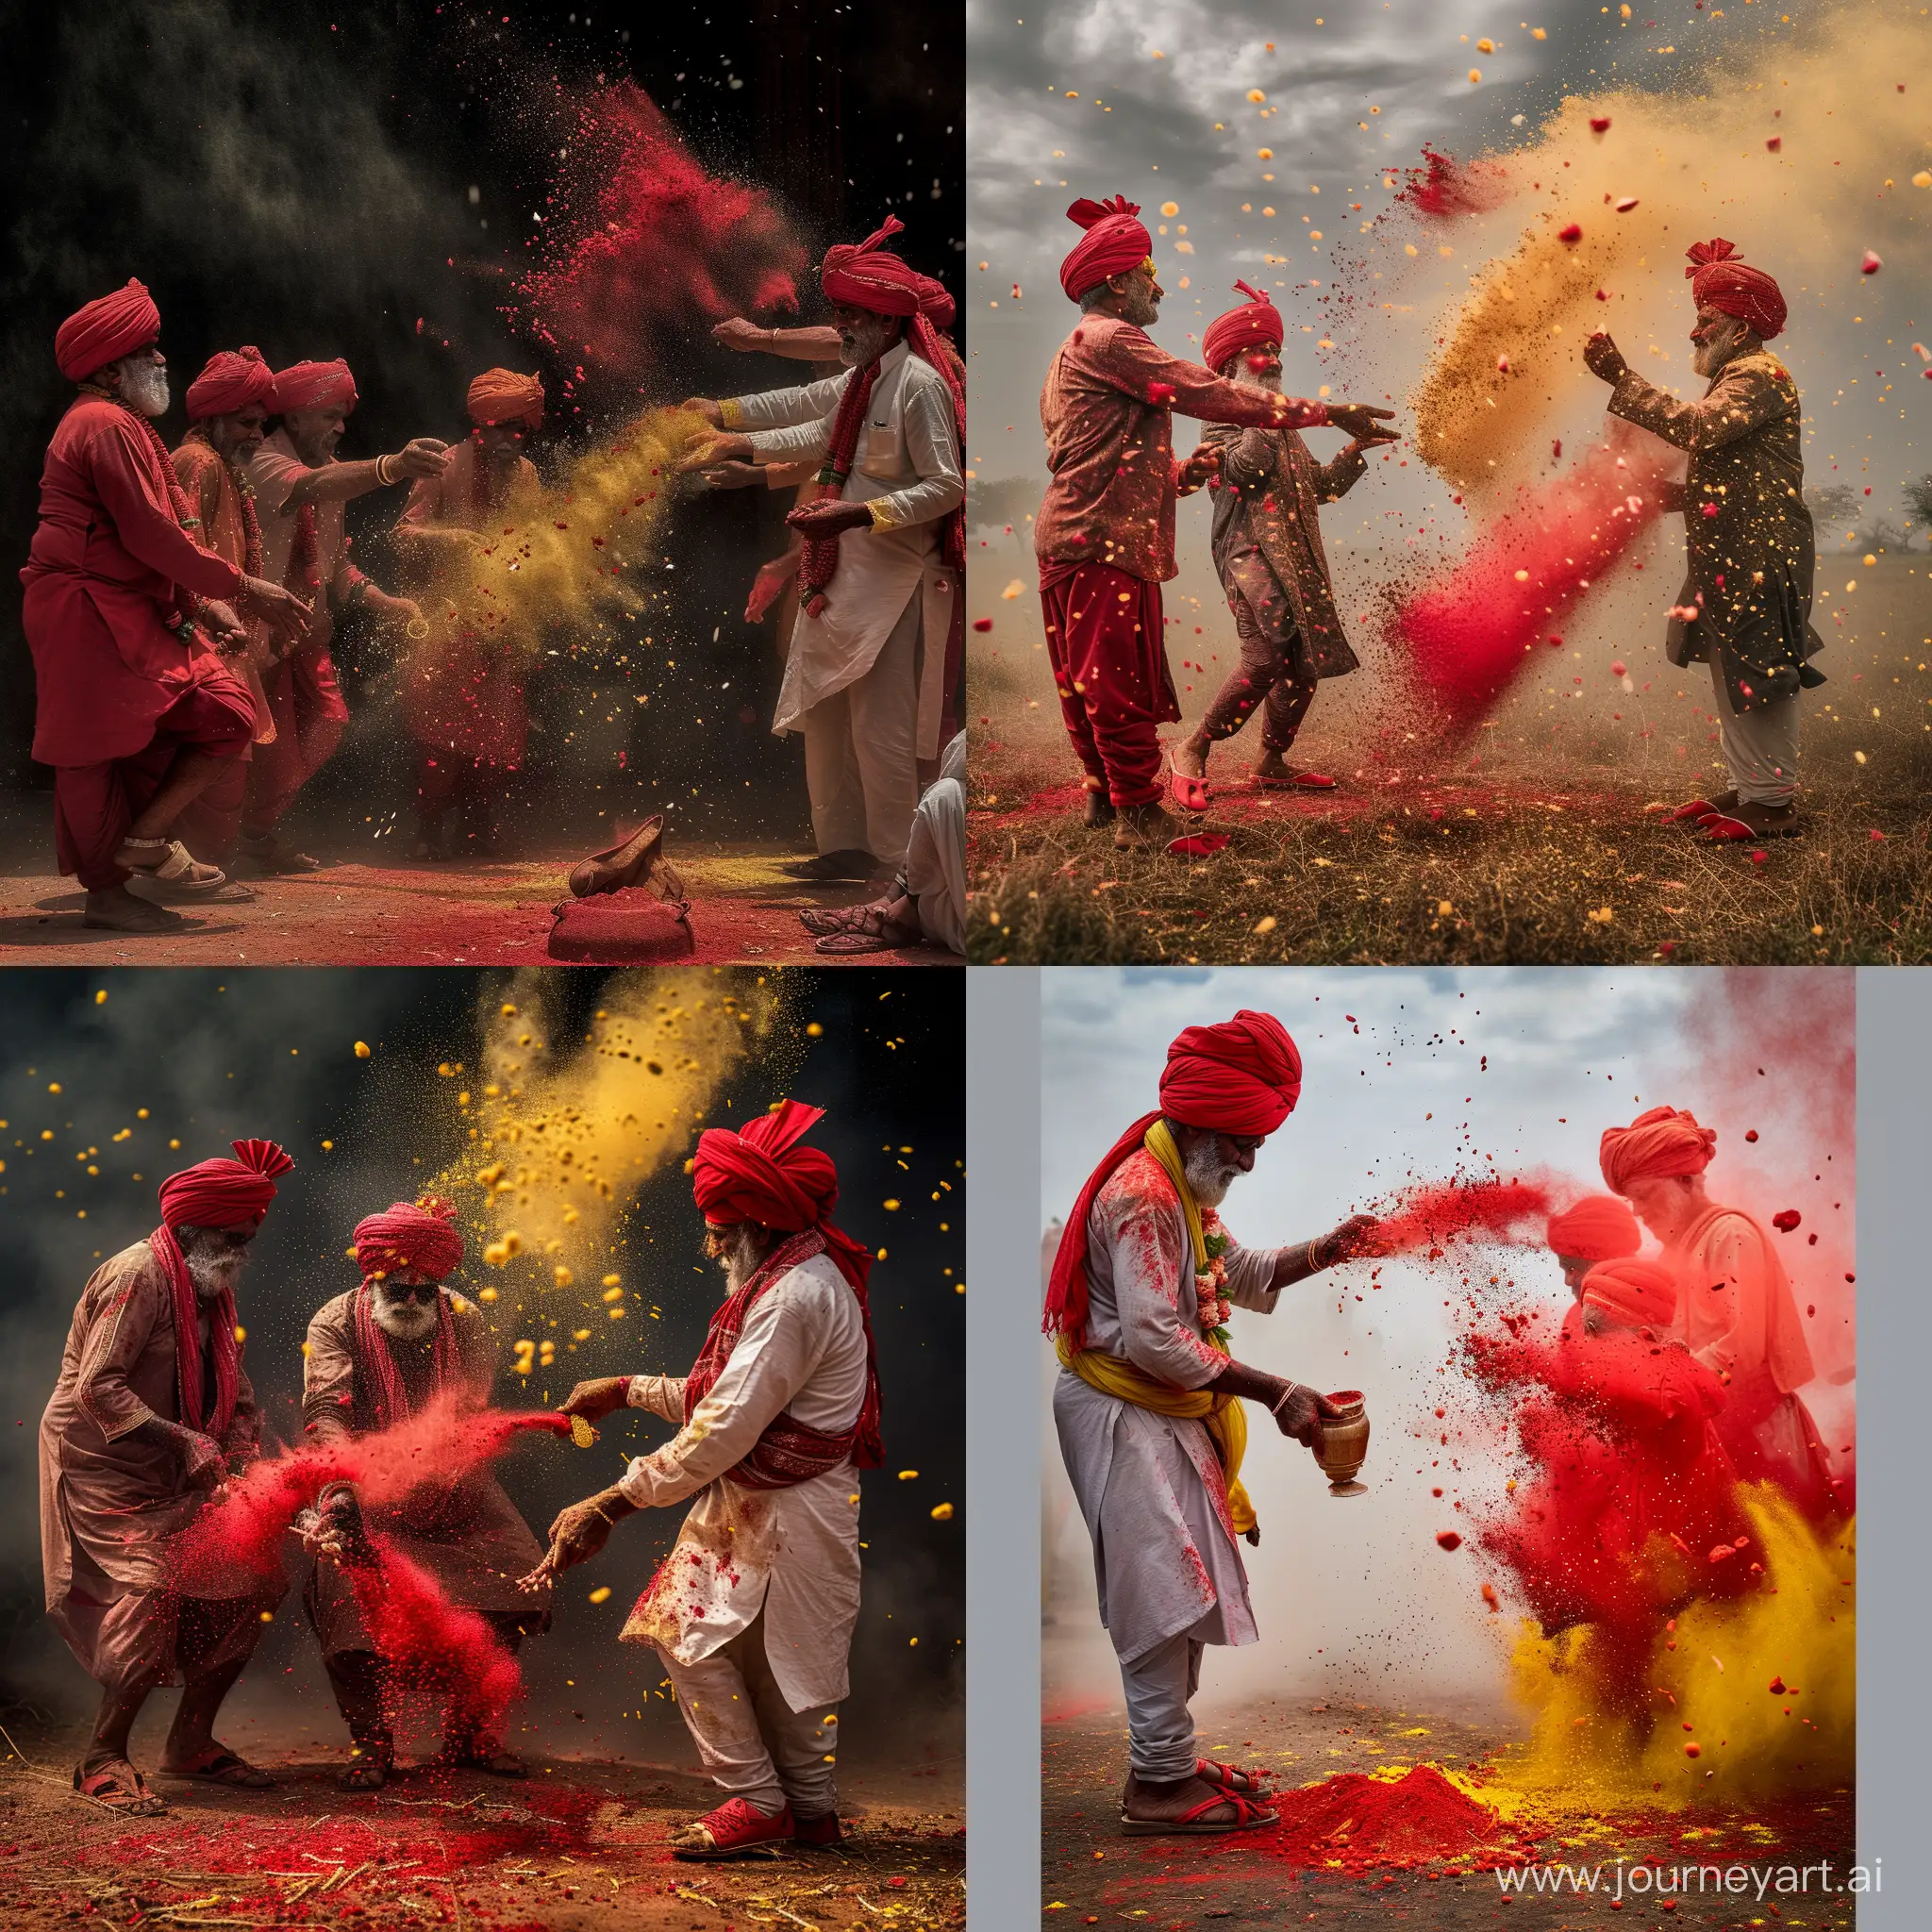   to rabari farmers rajasthan  70 years old with red turbans  and rajasthan shoes trowing holy powder red and yellow to each other  powder is flying around every where some movement  low contrast and light 50 mm fuji xt4 foto realistisch